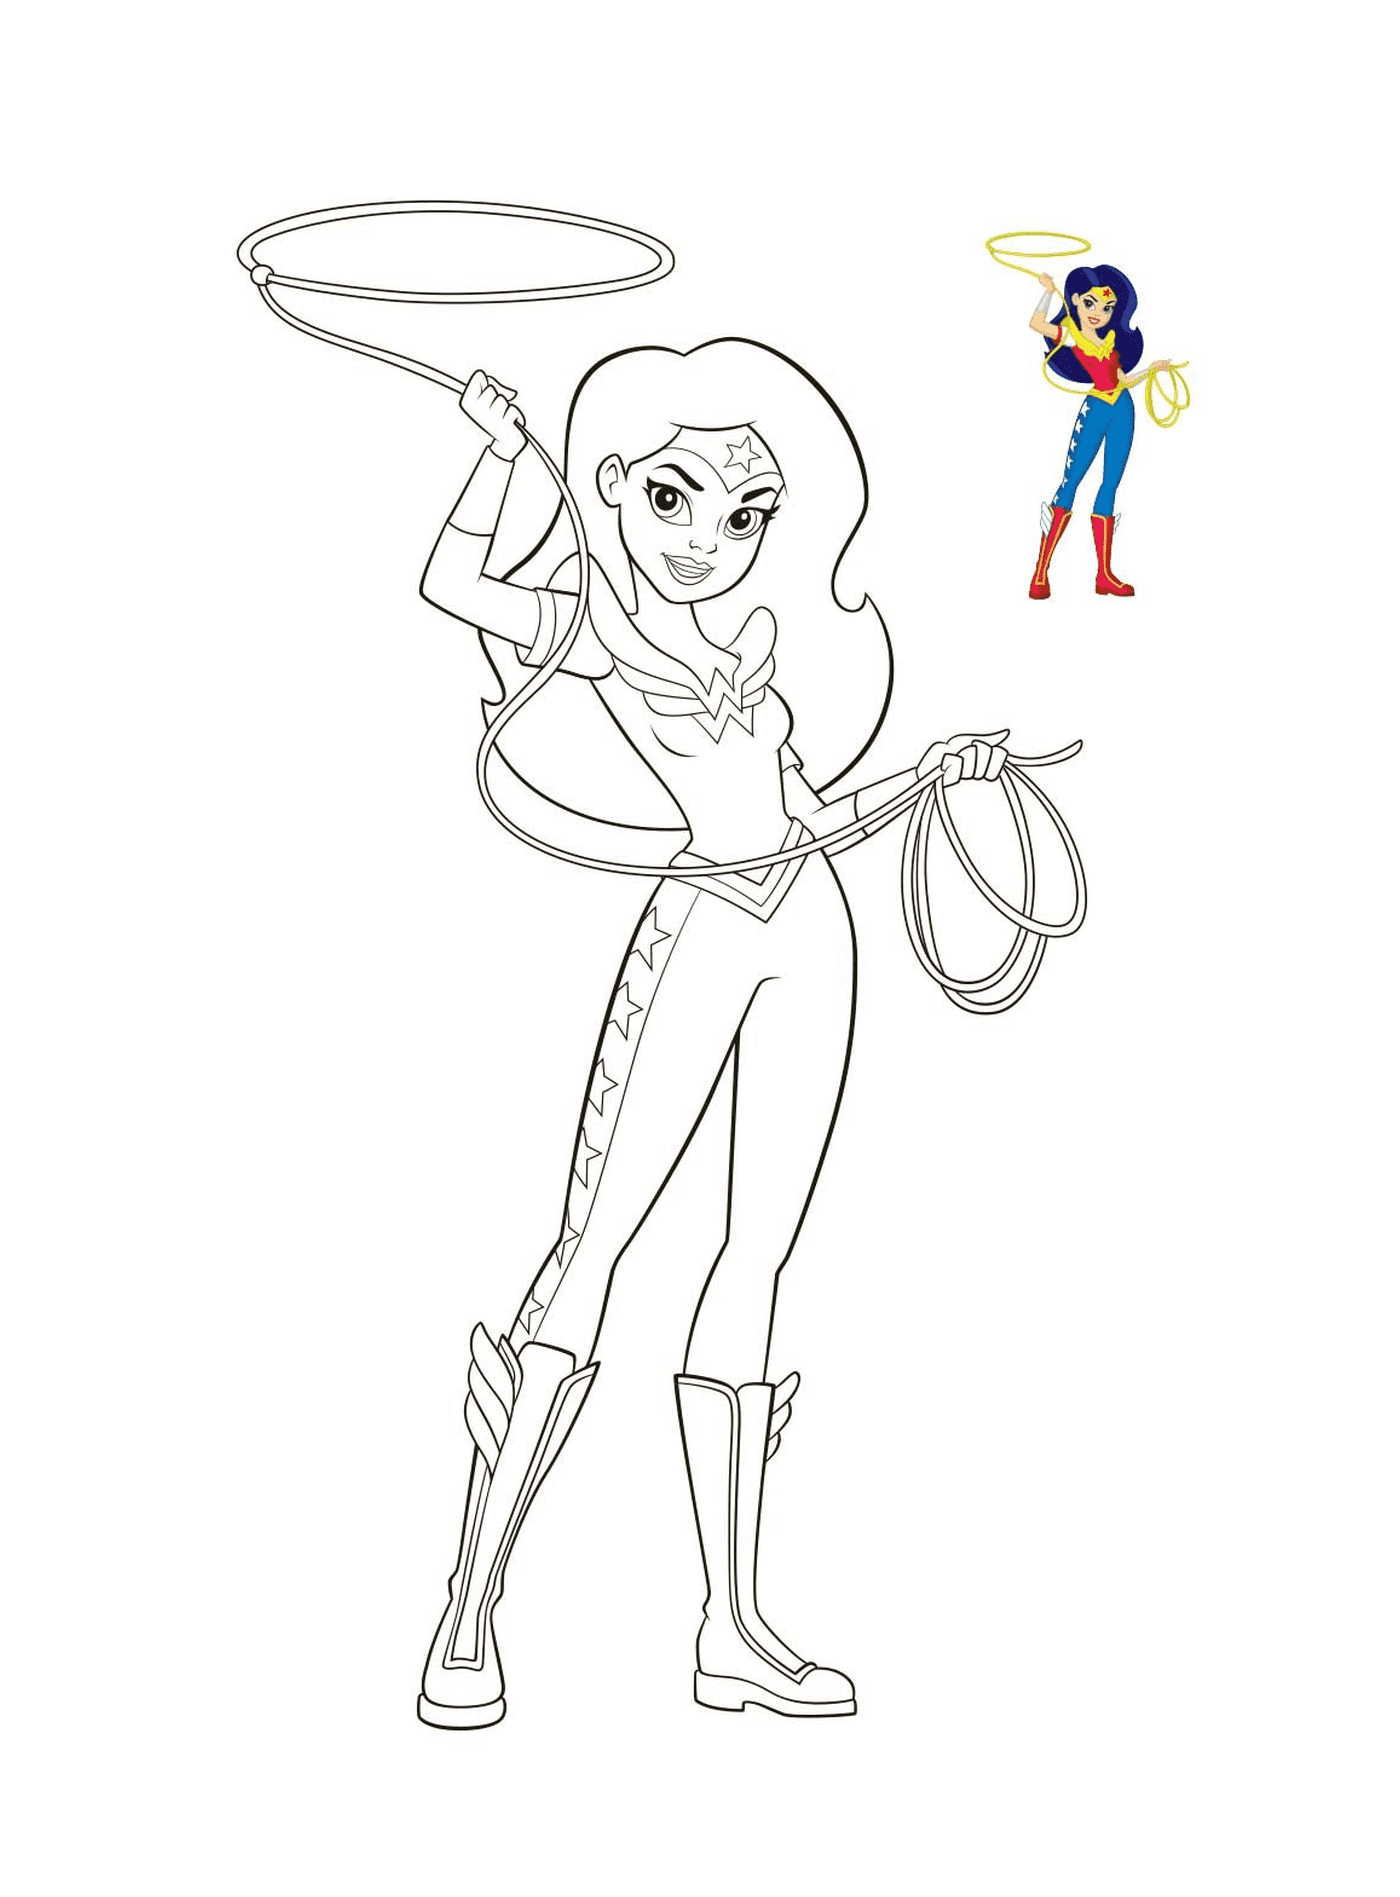  Wonder Woman from DC Super Hero Girls holding a lasso 